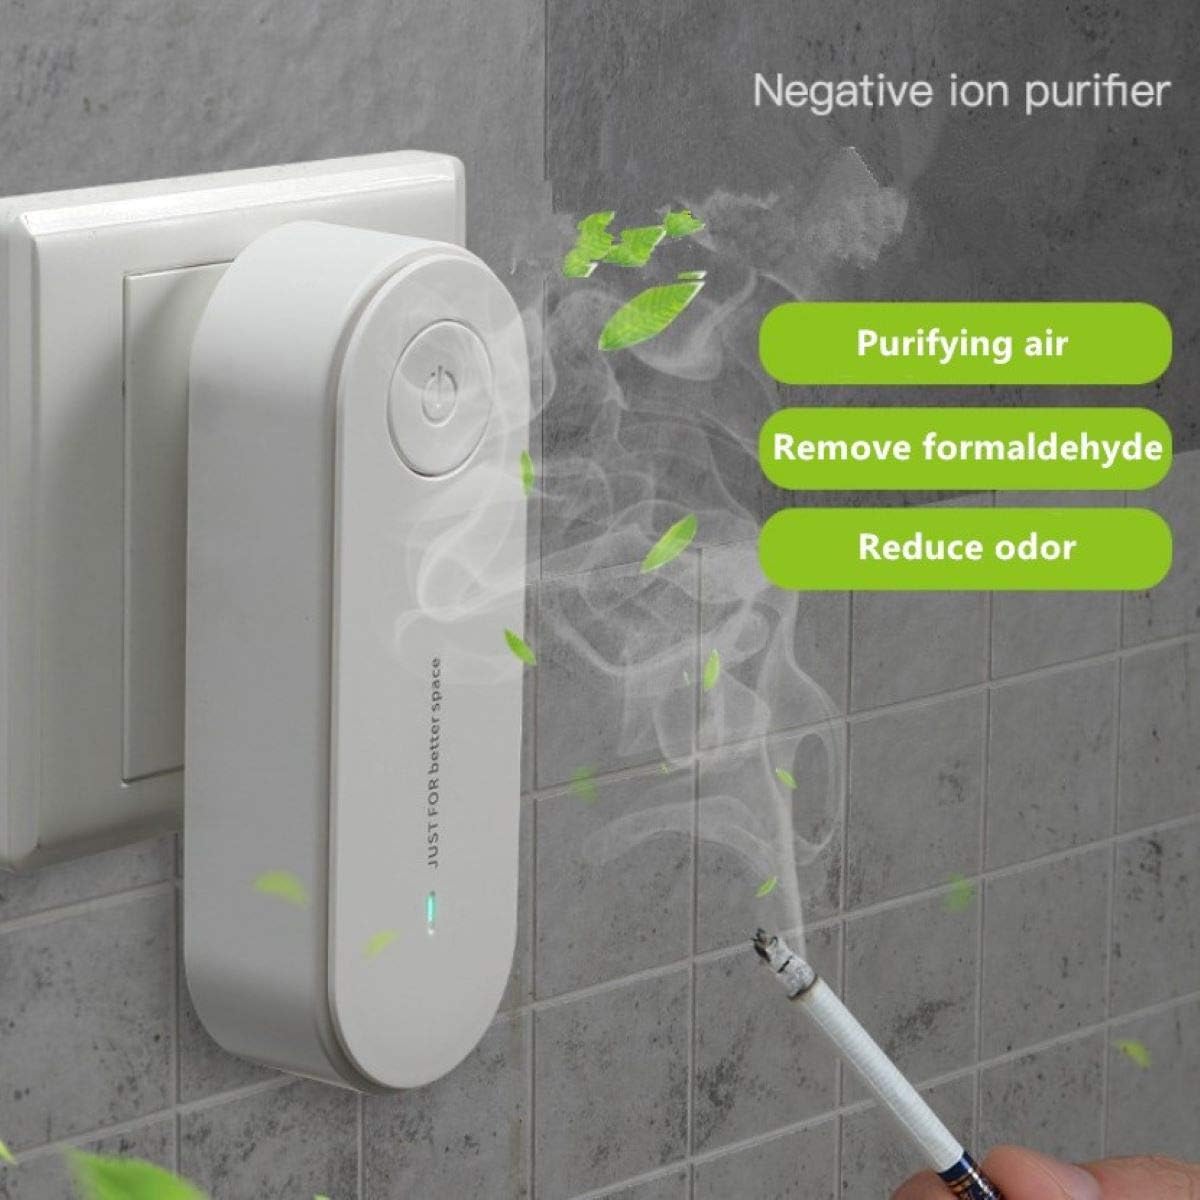 Portable Negative Ion Air Purifier Silent, Filter-Free Air Cleaning for Small Spaces